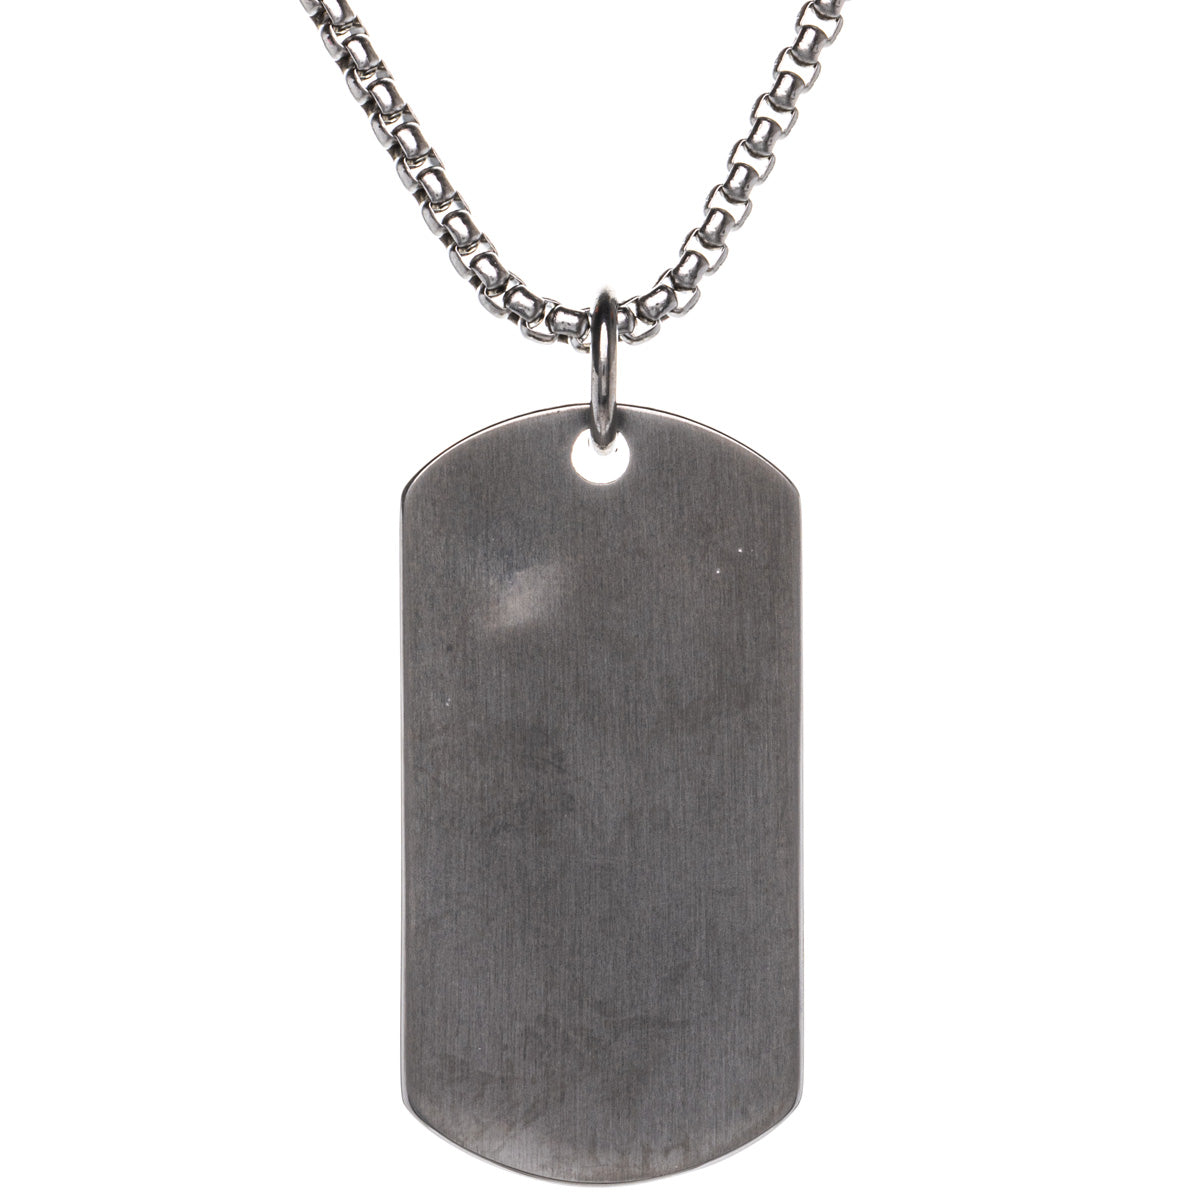 Basketball plate pendant necklace (Steel 316L)